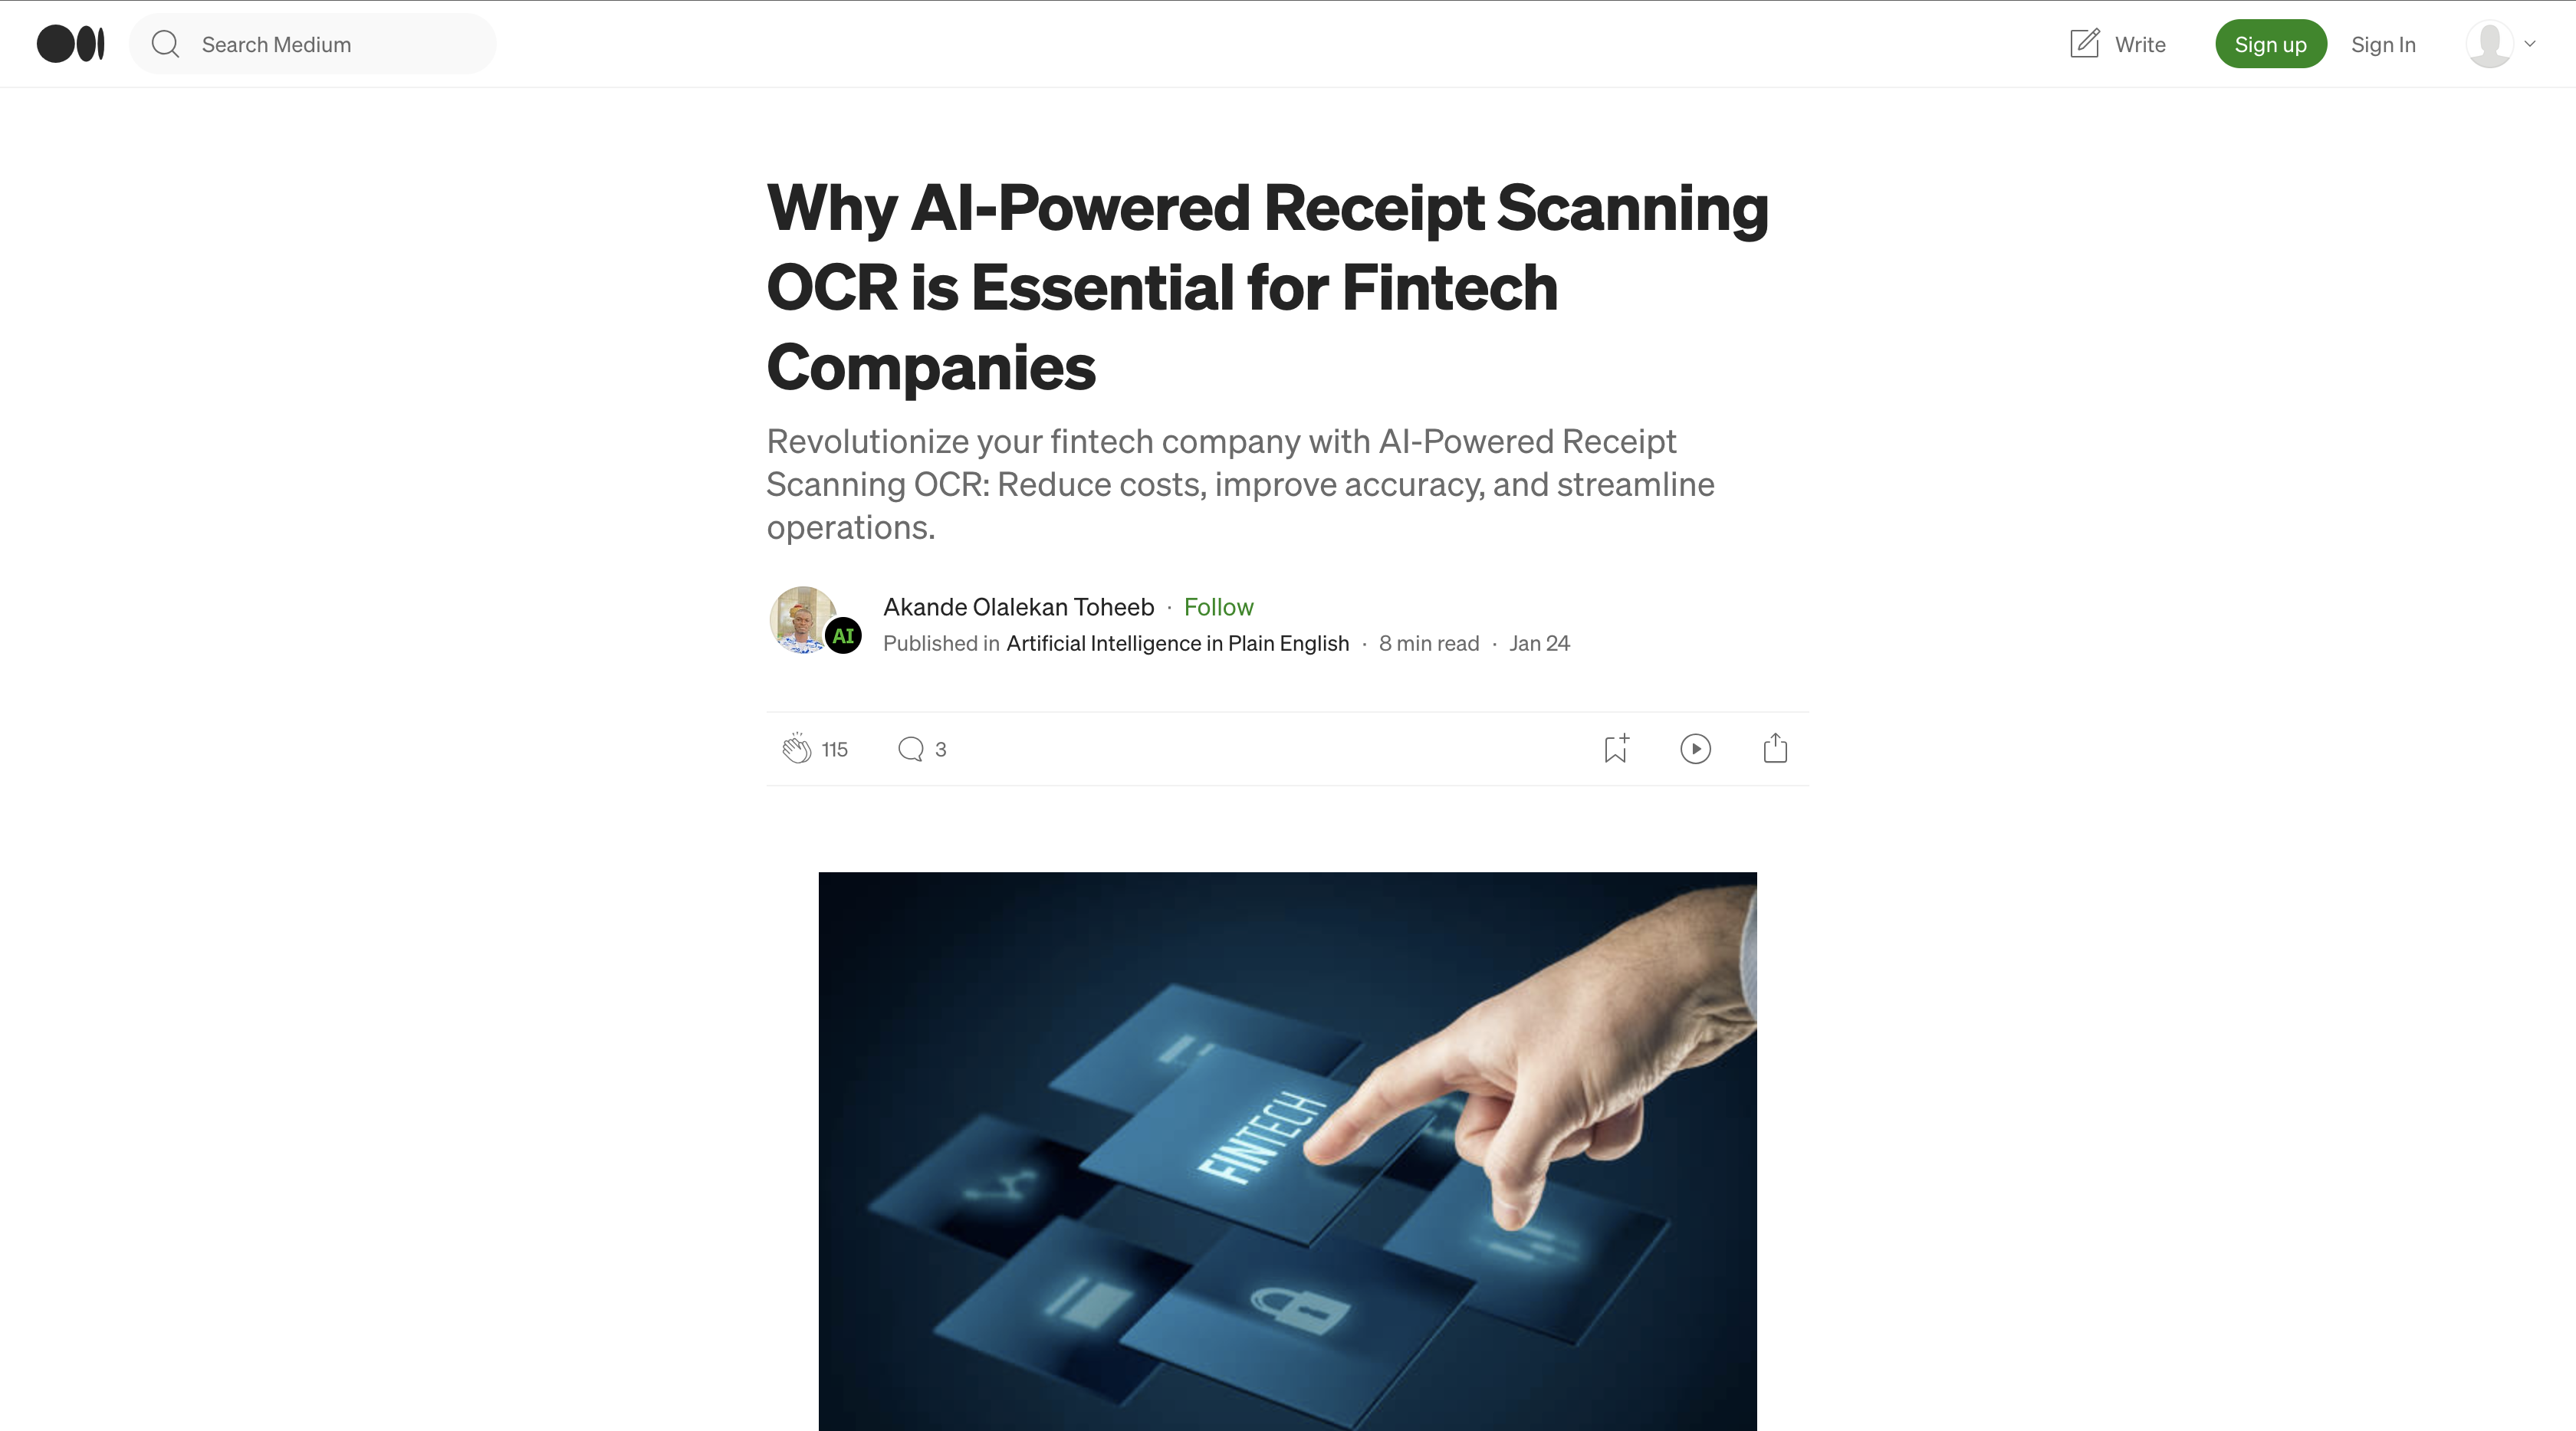 Why AI-Powered Receipt Scanning OCR is Essential for Fintech Companies